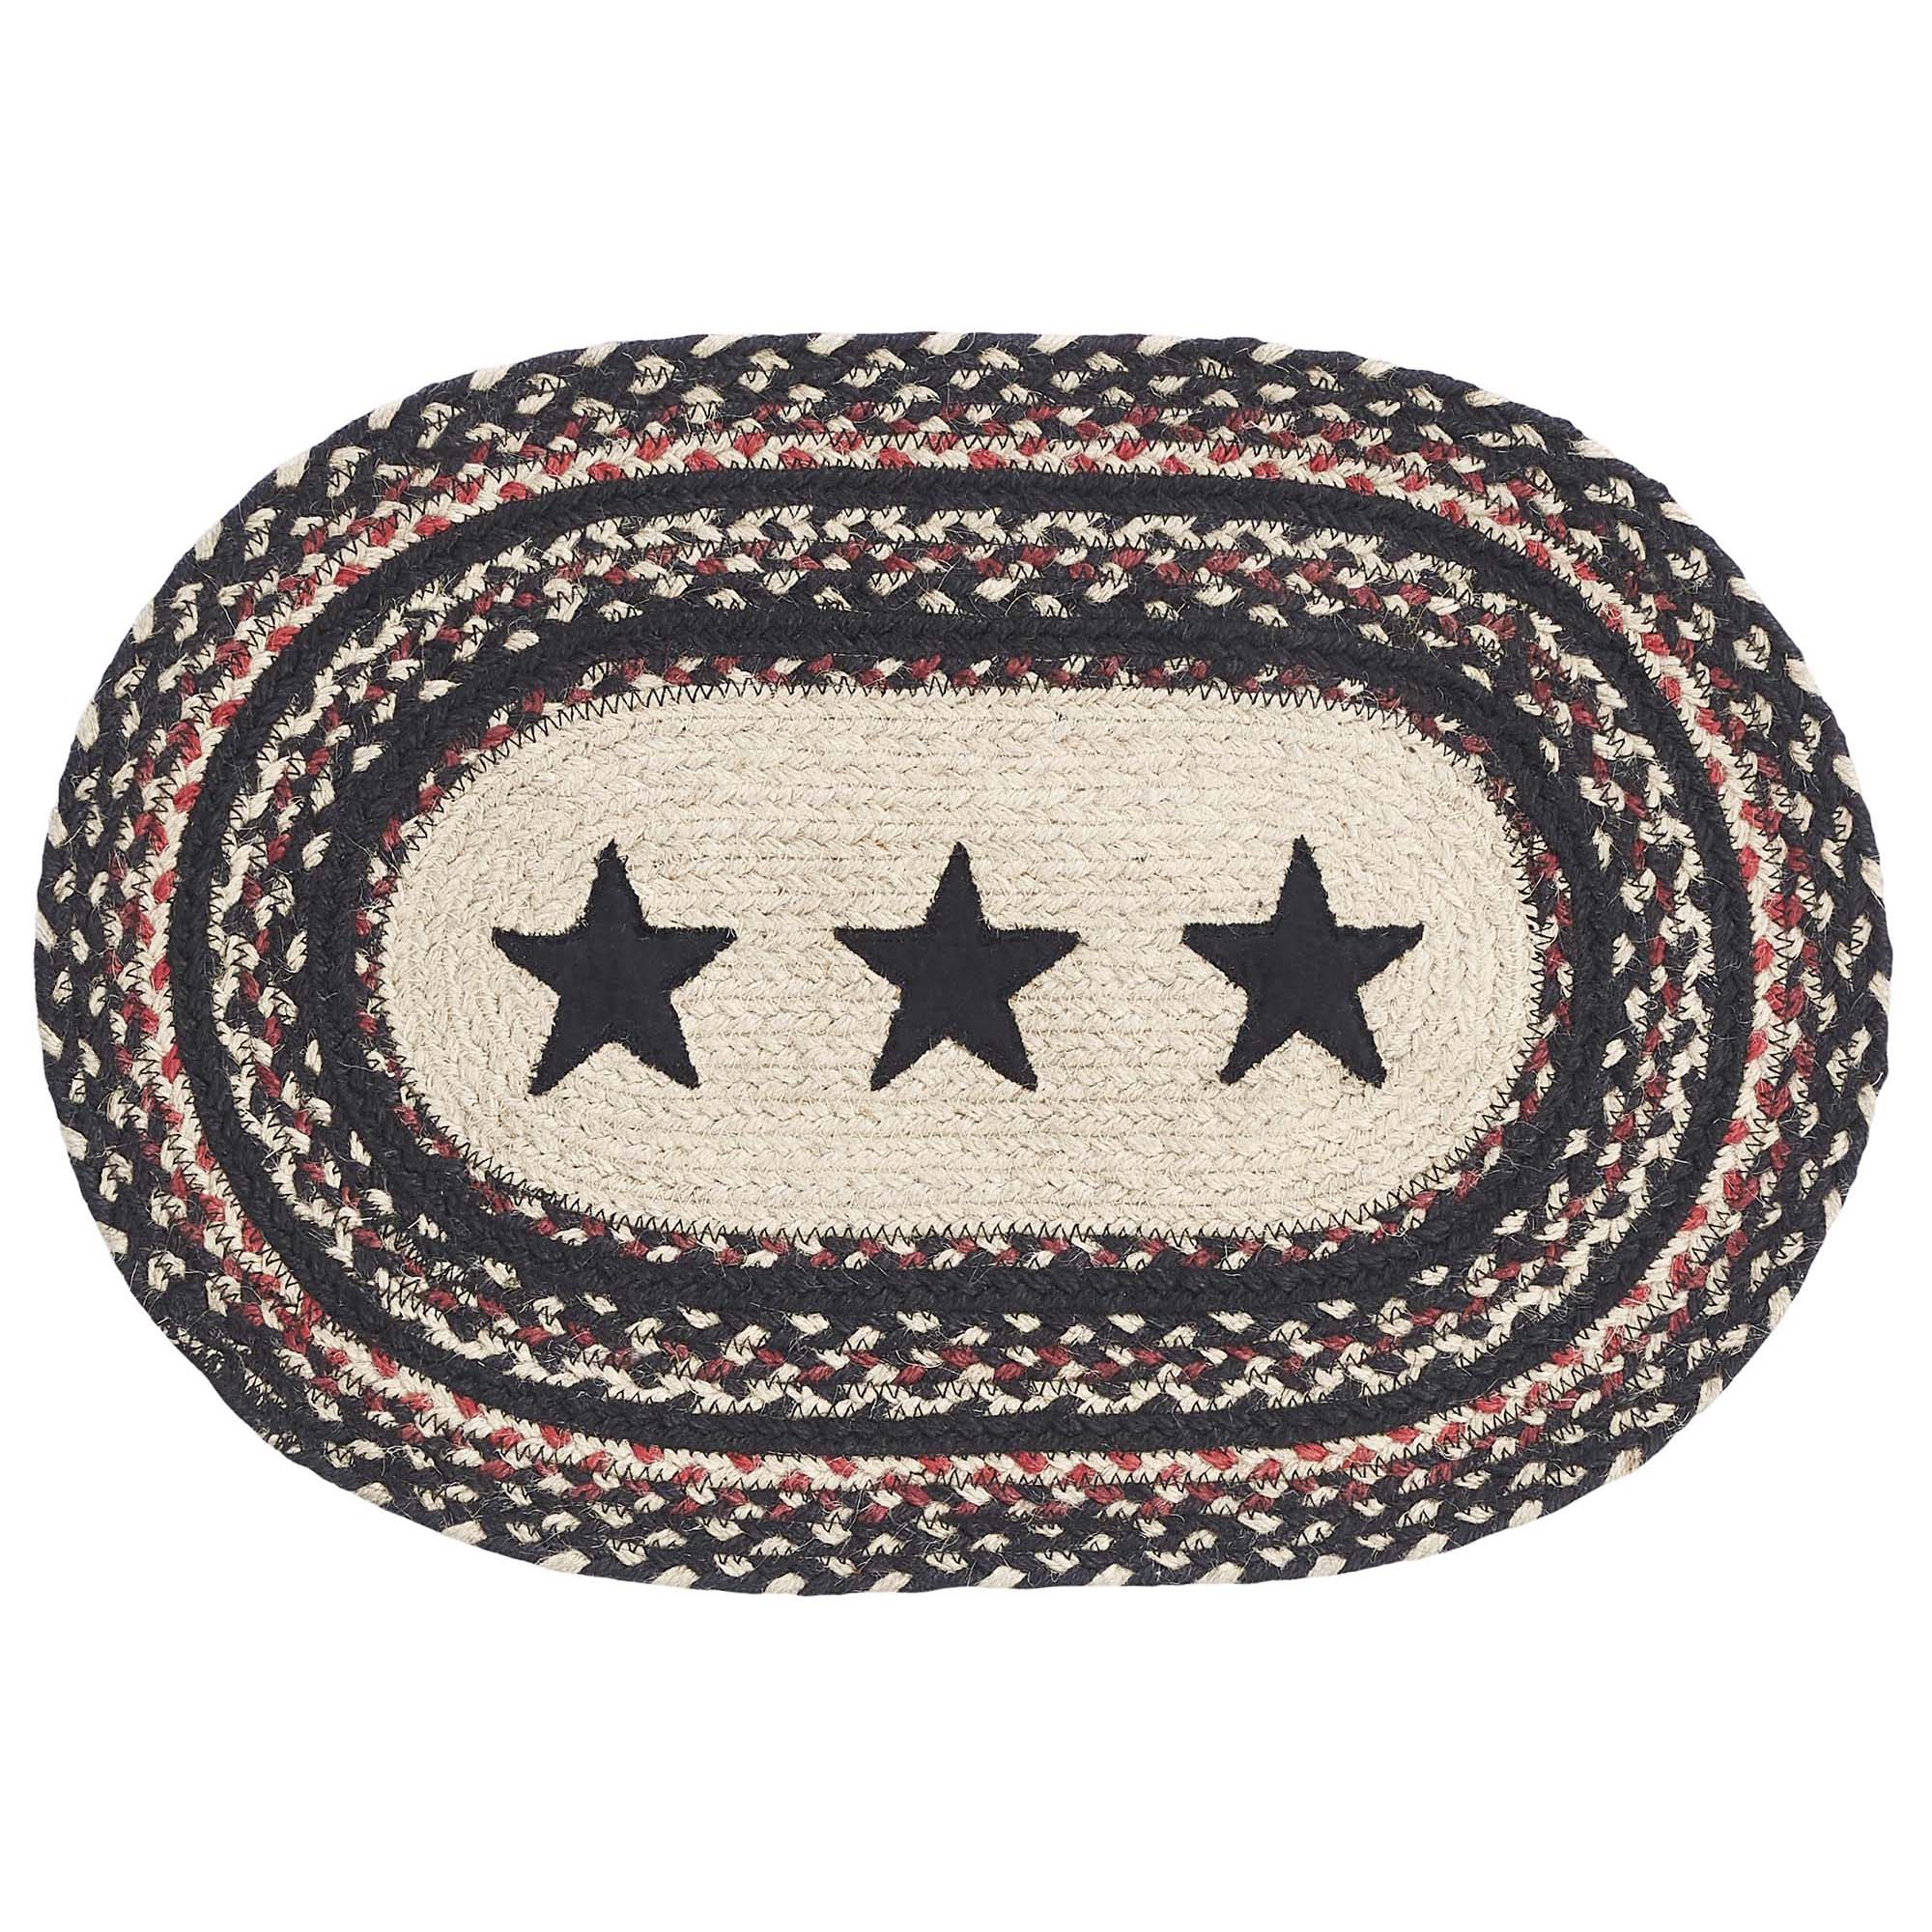 Colonial Star Jute Braided Oval Placemat 12"x18" VHC Brands